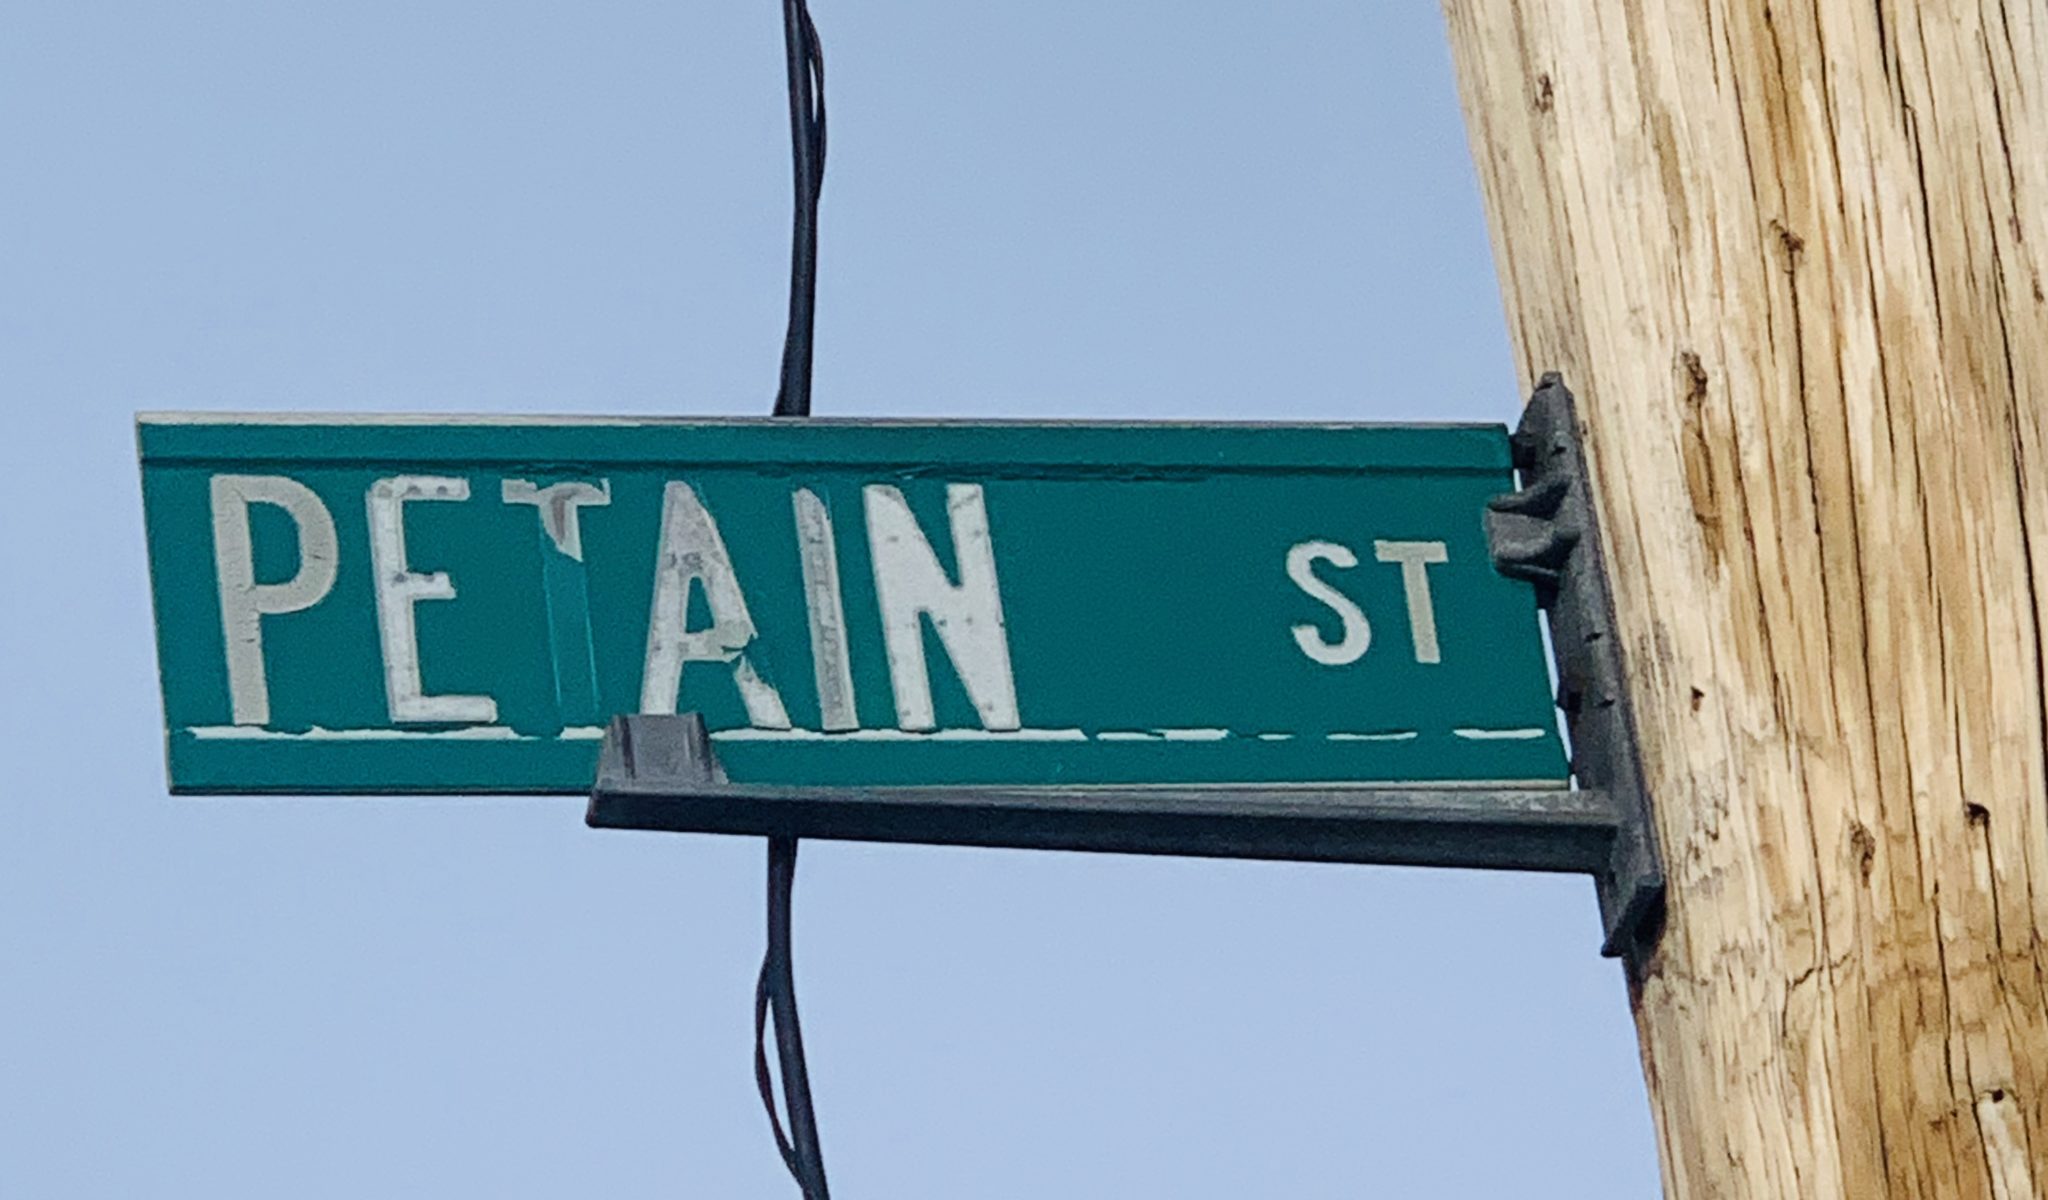 A worn street sign for Pétain Street in Pinardville, New Hampshire. (Photo Credit: TBlaze03103 / Wikimedia Commons CC BY-SA 4.0)